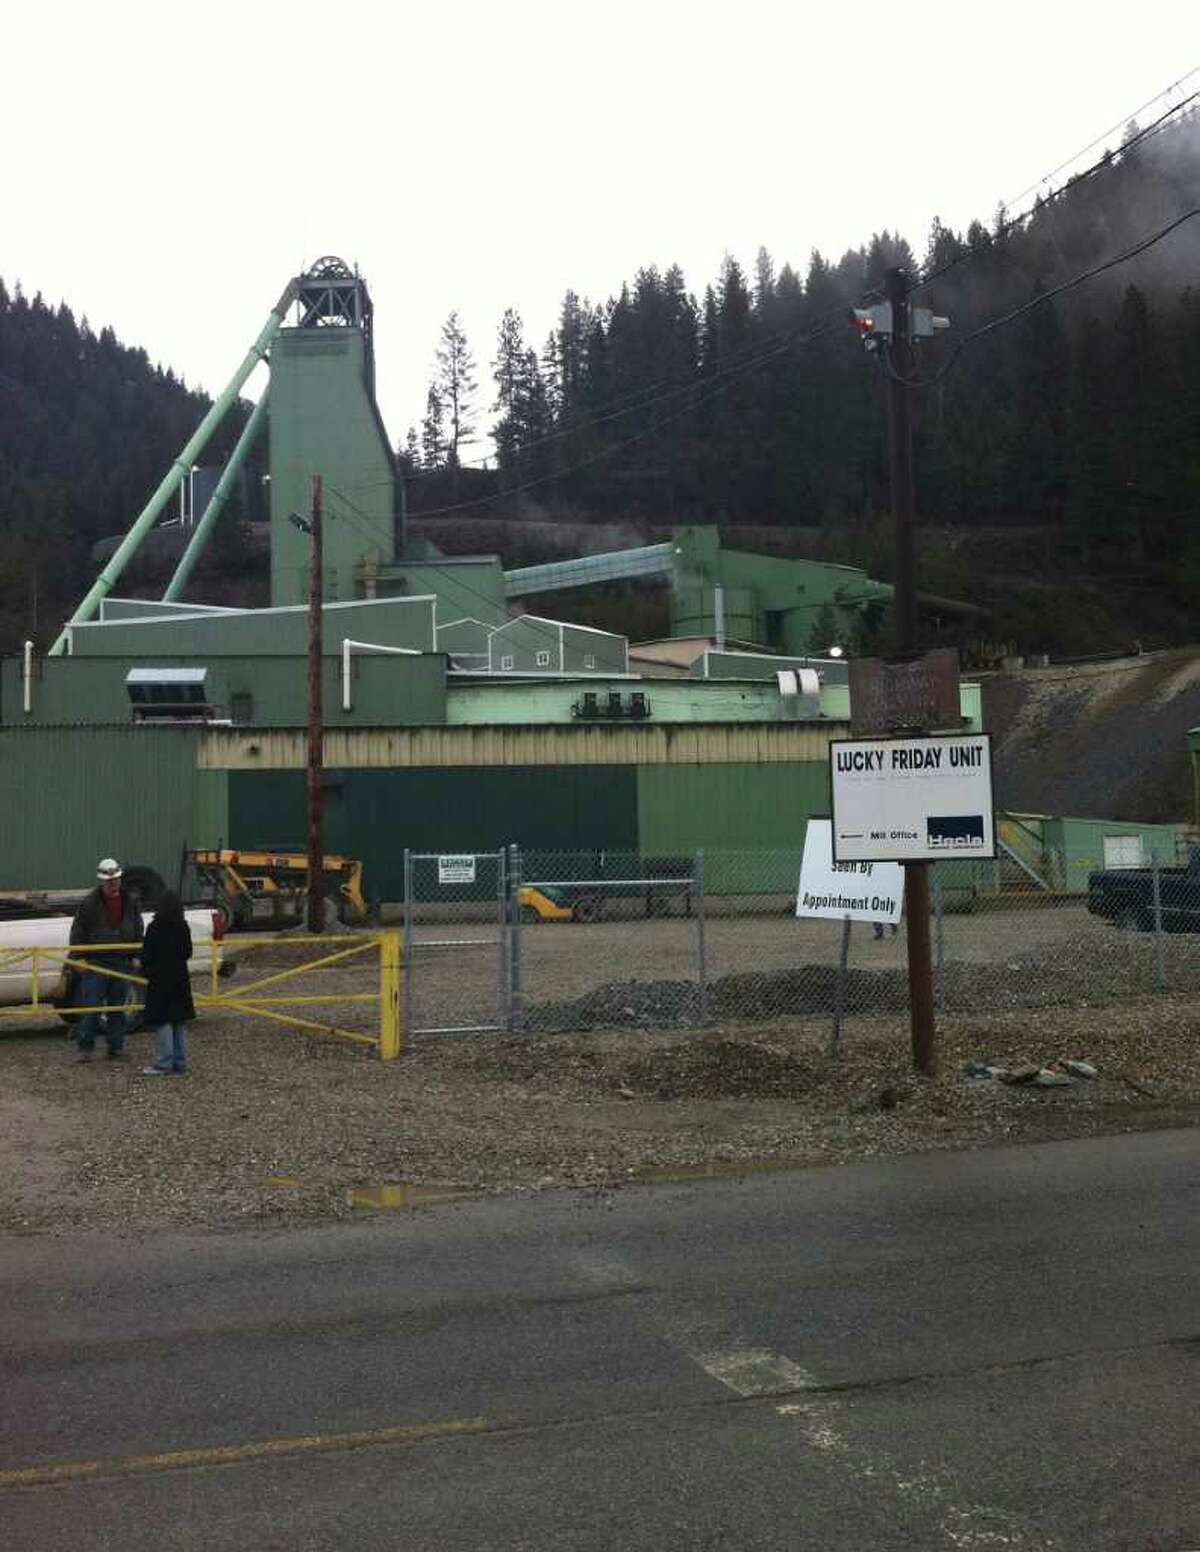 FILE - People stand at the entrance to the Lucky Friday Mine in Mullan, Idaho, in this April 16, 2011 file photo. An Idaho sheriff's officer says an underground rescue team has been sent to a mine after authorities received a report that miners have either been trapped or buried. Shoshone County sheriff's Capt. Holly Lindsey says Wednesday night Dec. 14, 2011 that it's unknown how many miners are involved or whether there are any injuries at the Lucky Friday Mine in northern Idaho. (AP Photo/KHQ-TV)